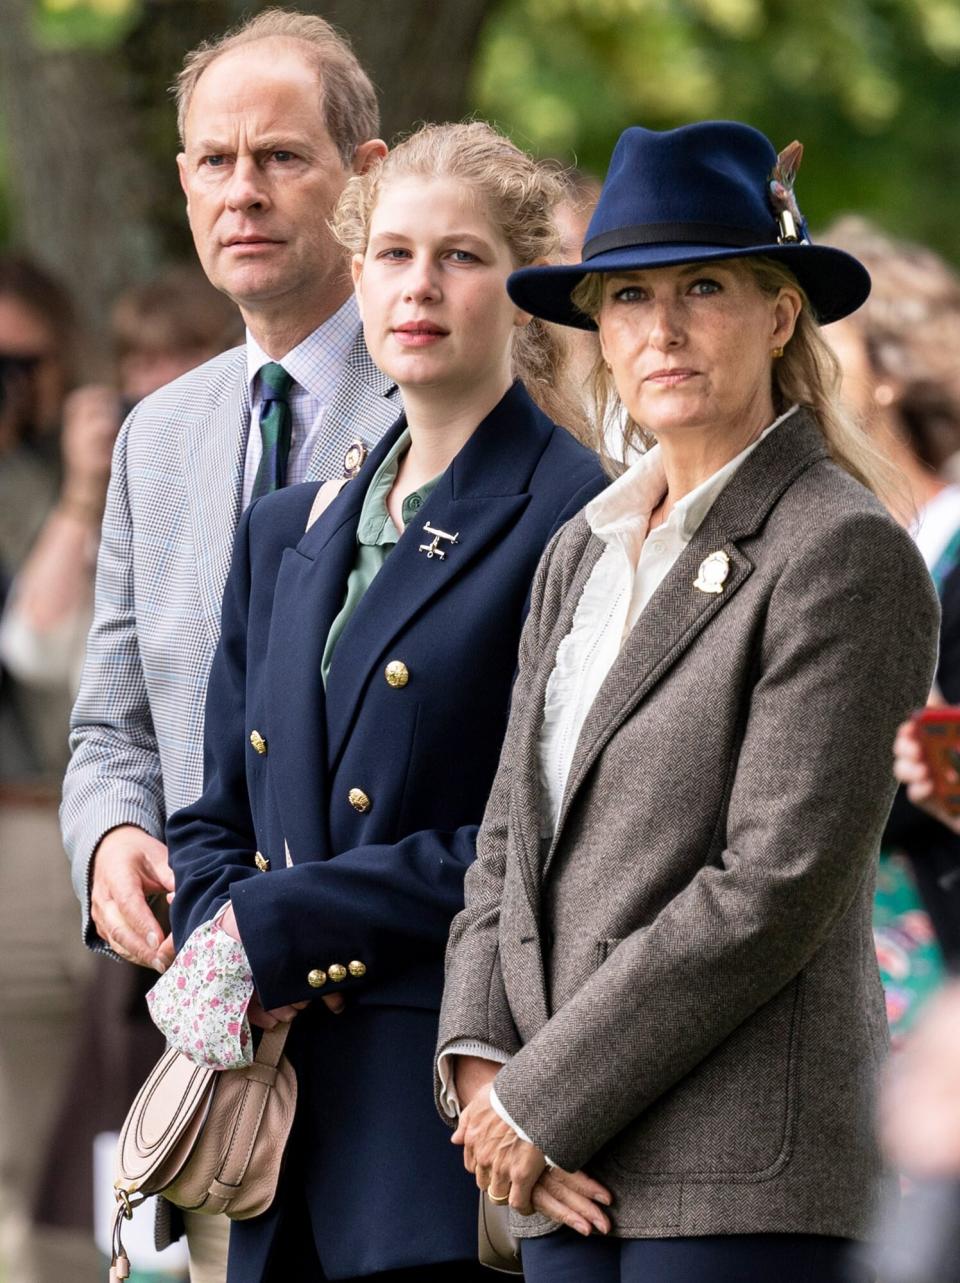 Prince Edward, Earl of Wessex and Sophie, Countess of Wessex with Lady Louise Windsor watch the Carriage Driving during the Royal Windsor Horse Show 2021 at Windsor Castle on July 3, 2021 in Windsor, England.